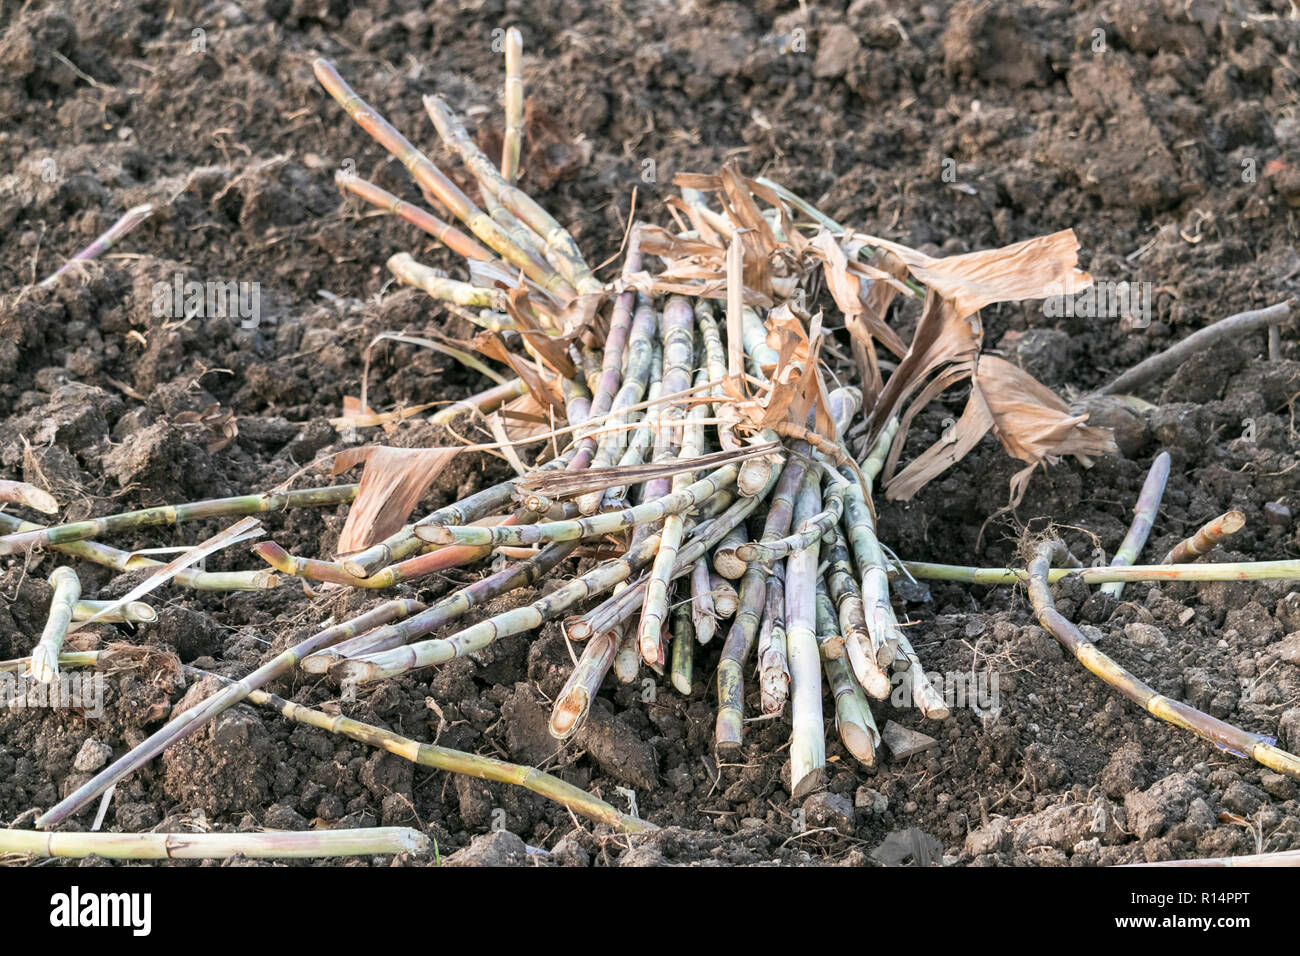 Sugar cane in Indian agriculture land Stock Photo